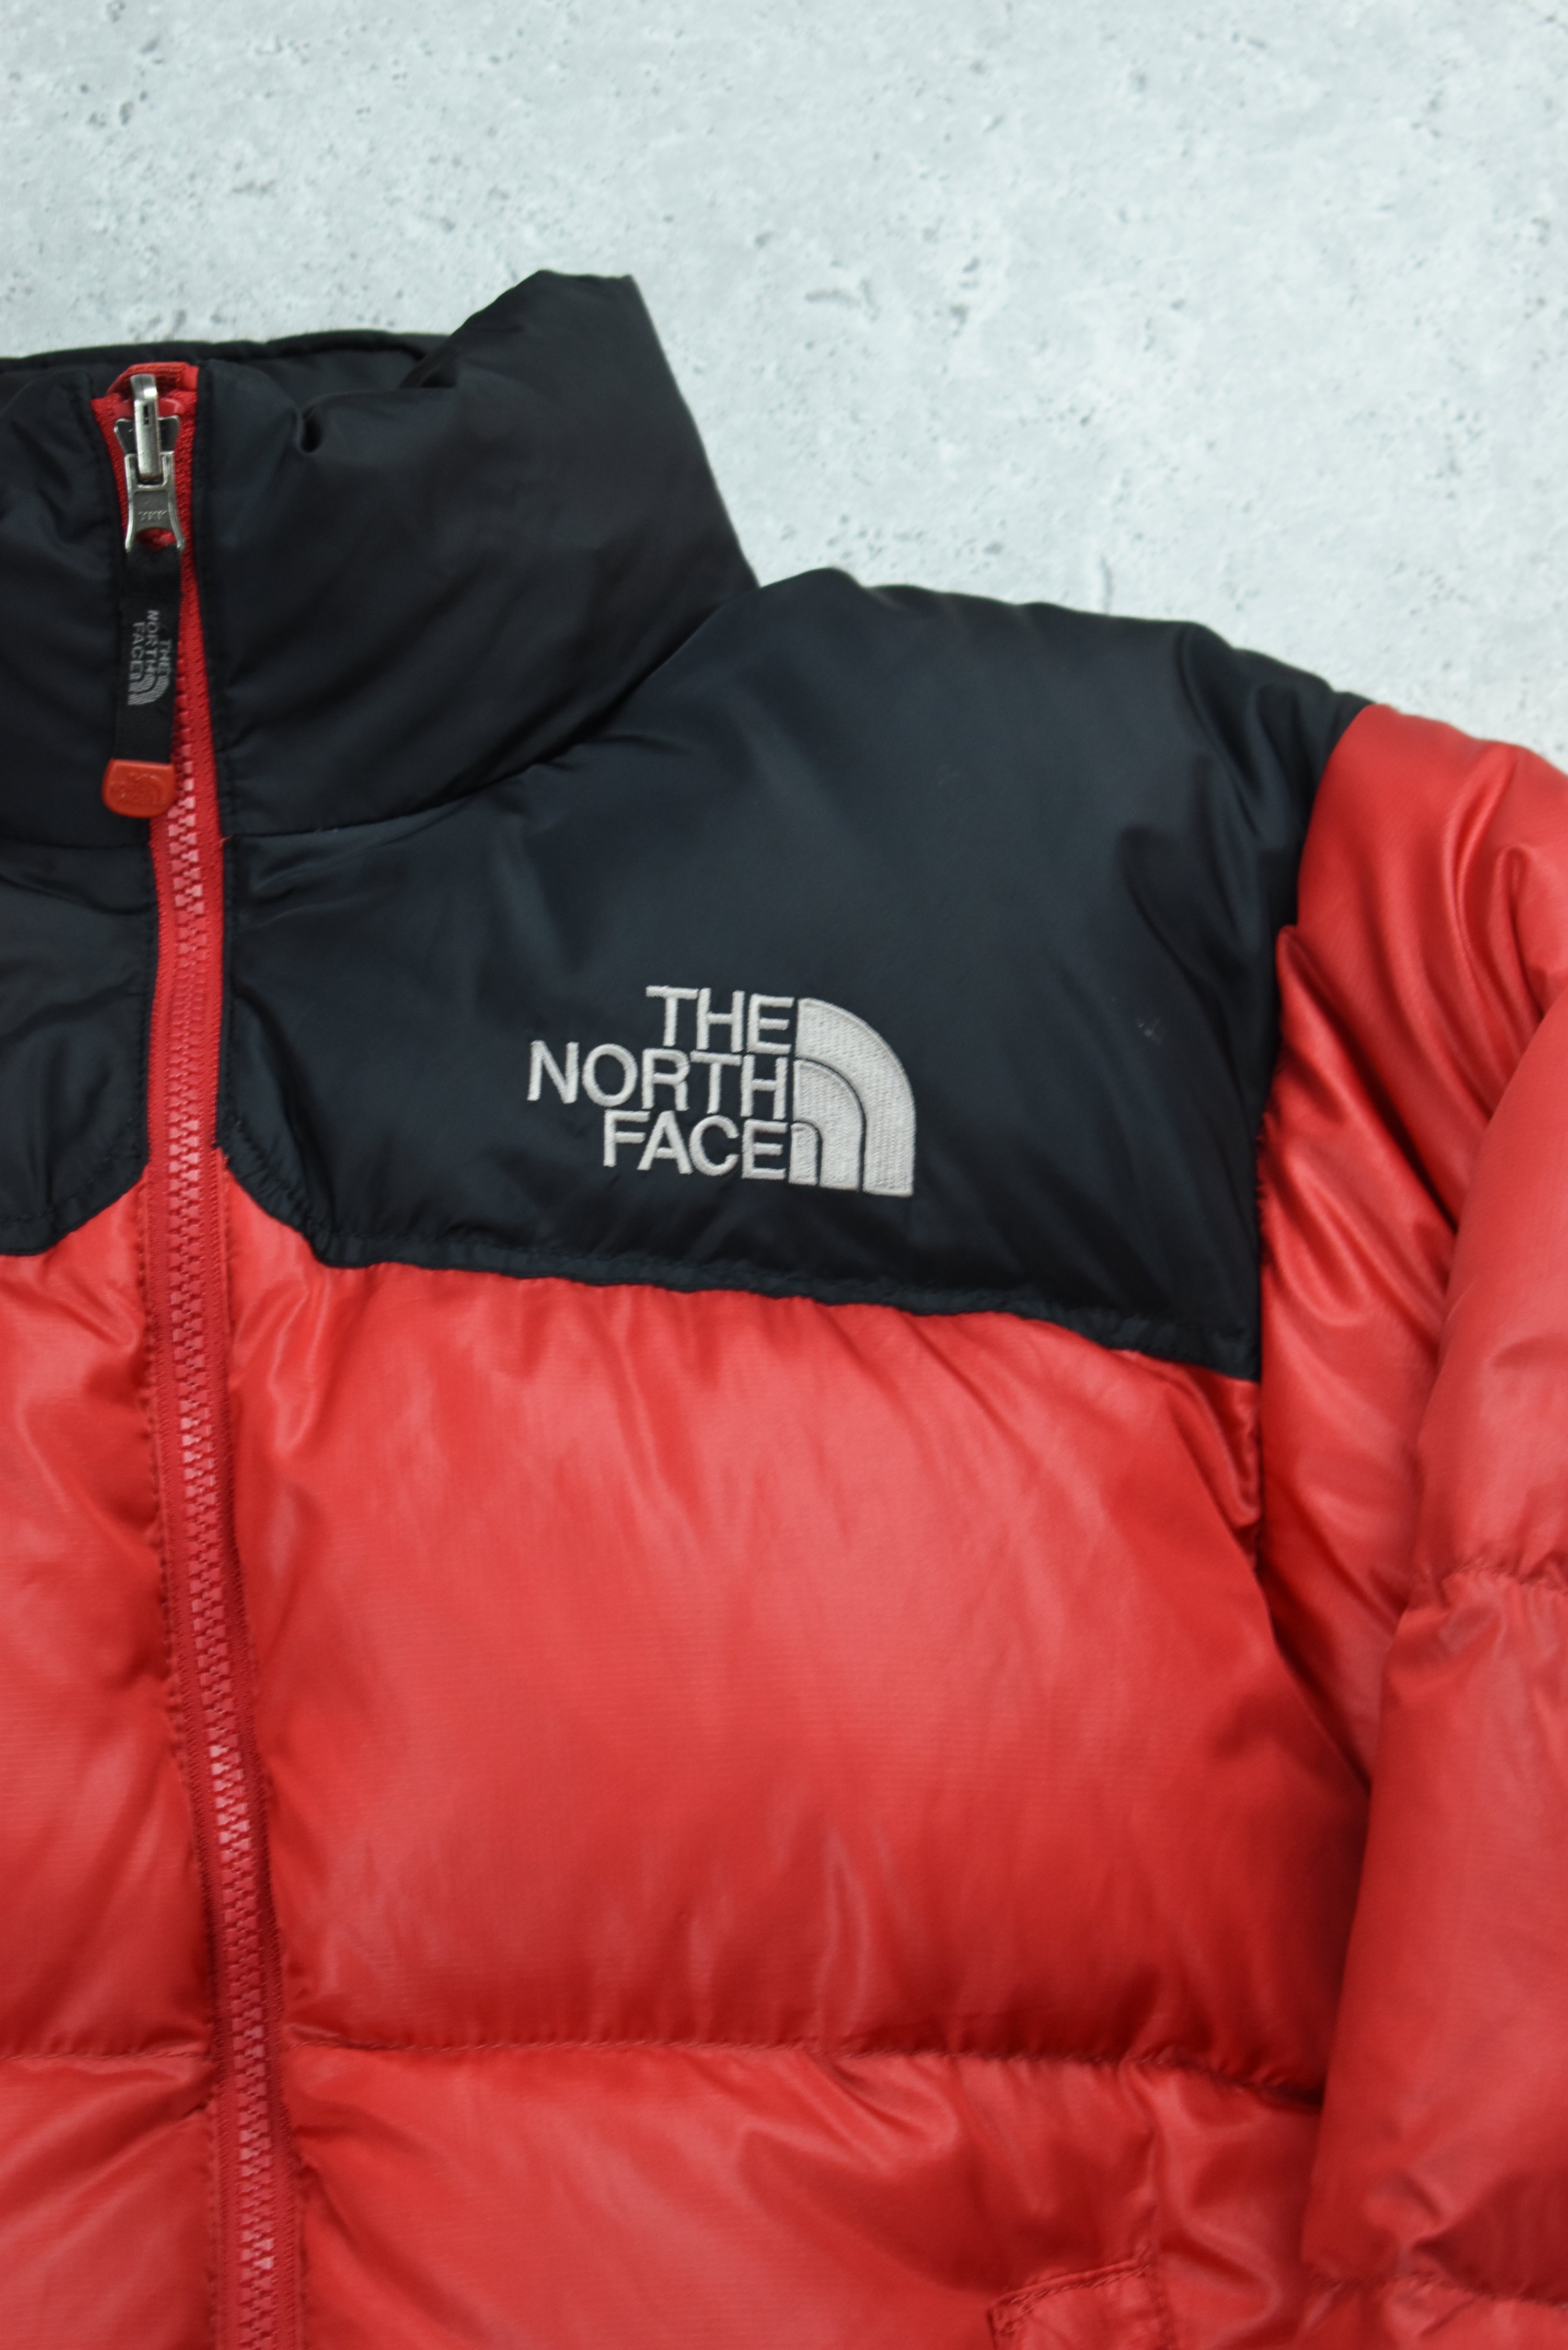 Vintage North Face 700 Nuptse Puffer Red Xlarge